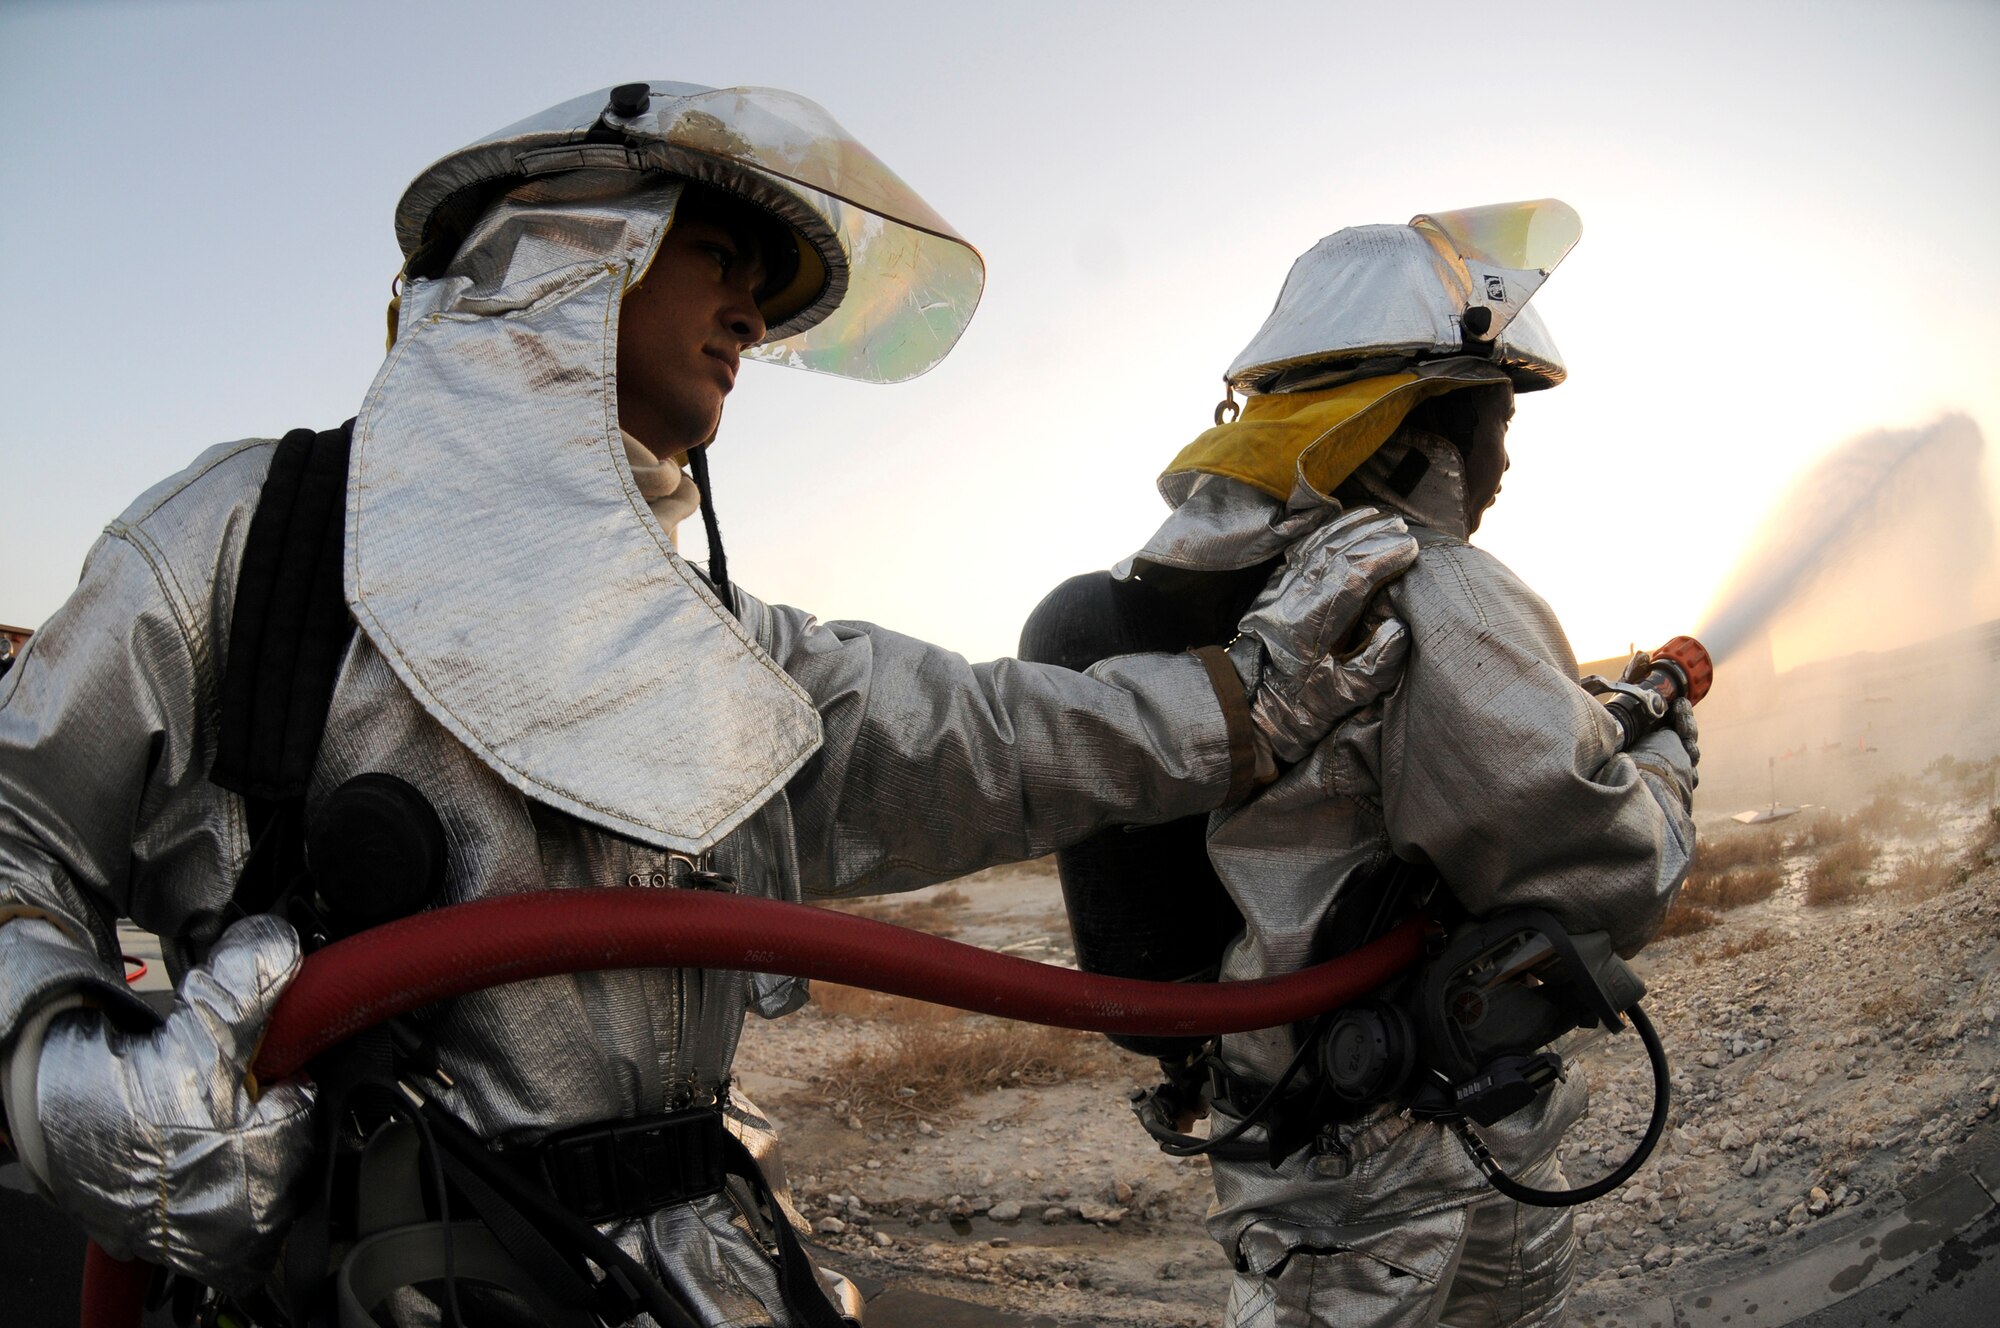 Staff Sgt. Alex Retamoza uses his hand to support Airman 1st Class Michael Thomas as he sprays a hose line as part of a daily operational check Oct. 20, 2008, at an undisclosed air base in Southwest Asia.  Both firefighters are deployed to the 379th Expeditionary Civil Engineer Squadron in support of Operations Iraqi and Enduring Freedom and Joint Task Force-Horn of Africa.  Sergeant Retamoza, a native of South El Monte, Calif., is deployed from Beale Air Force Base, Calif., and Airman Thomas, a native of Union City, Tenn., is deployed from Moody AFB, Ga.  (U.S. Air Force photo by Staff Sgt. Darnell T. Cannady/Released)